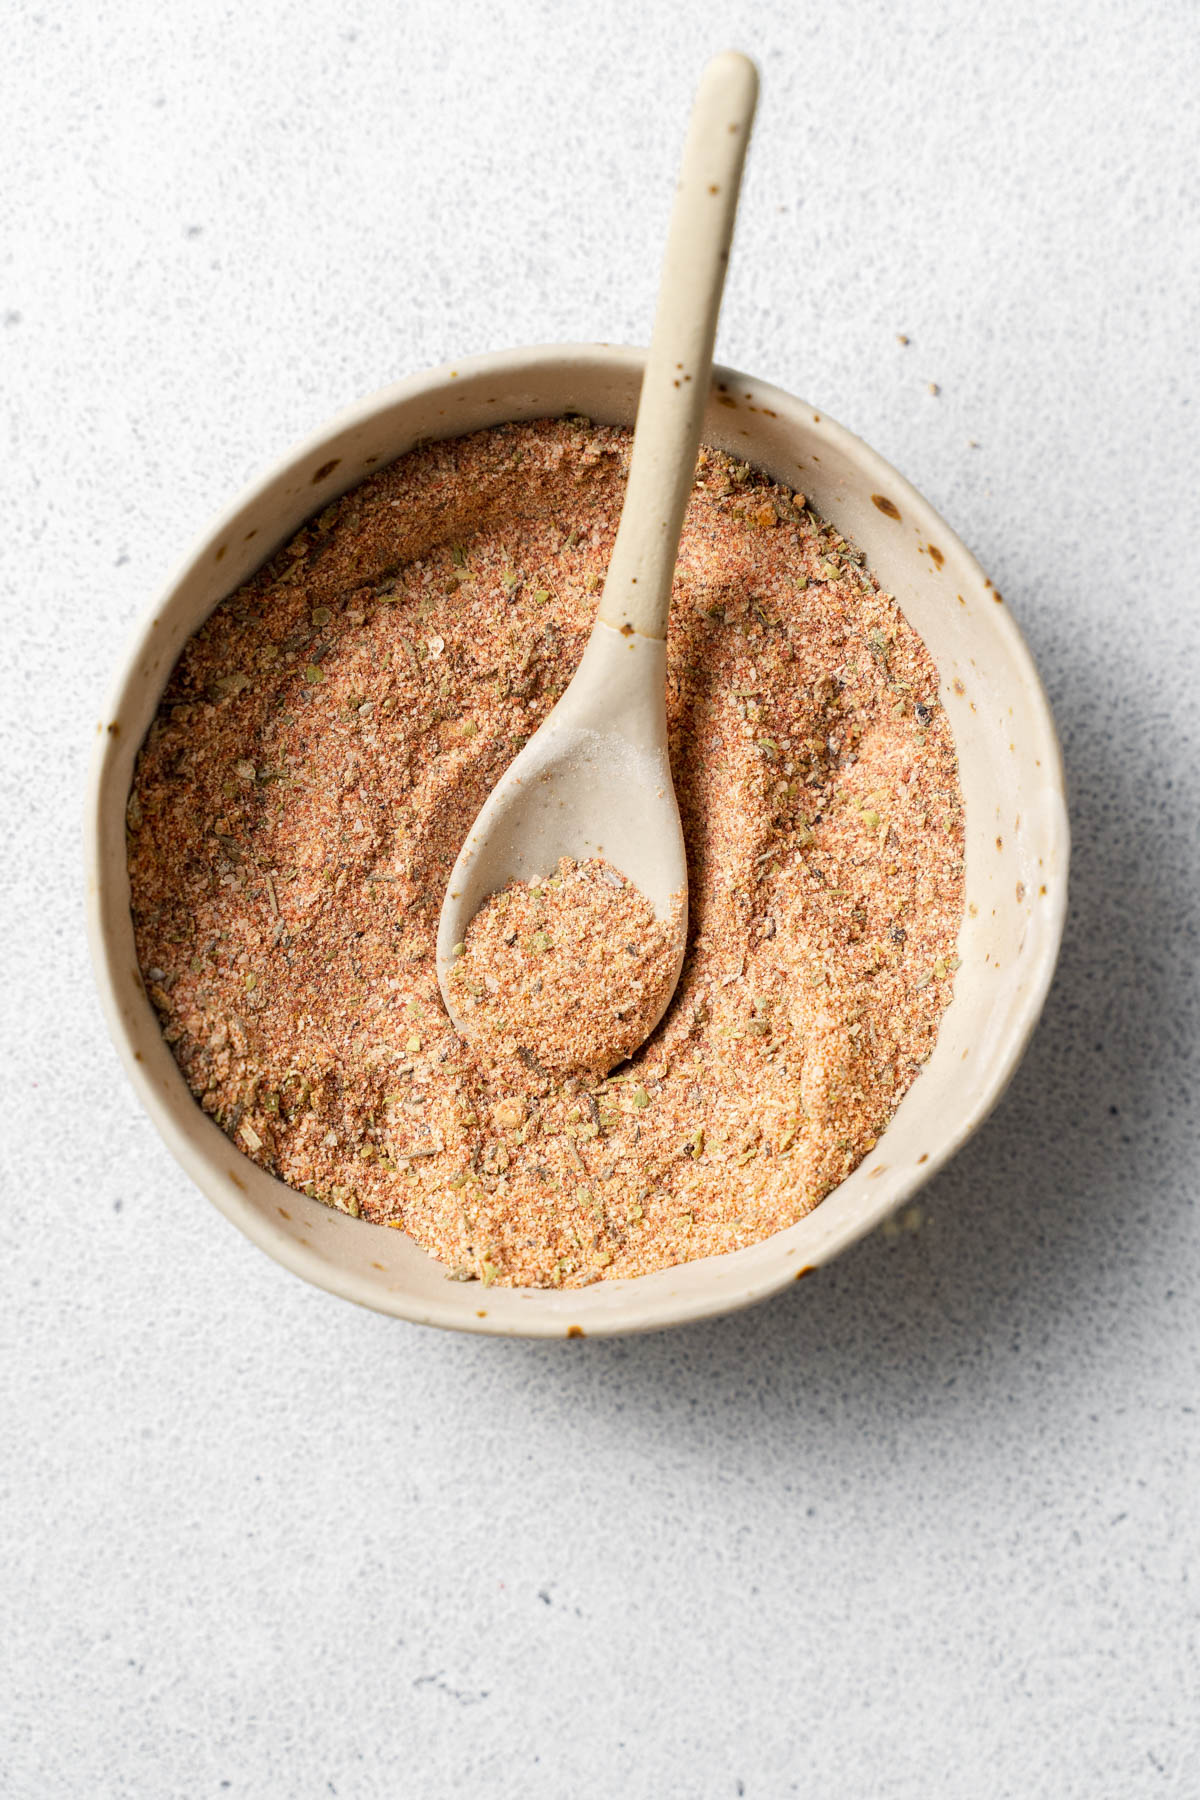 Overhead image of a bowl containing a spice blend. A spoon is inserted in the blend and is resting on the edge of the bowl. 